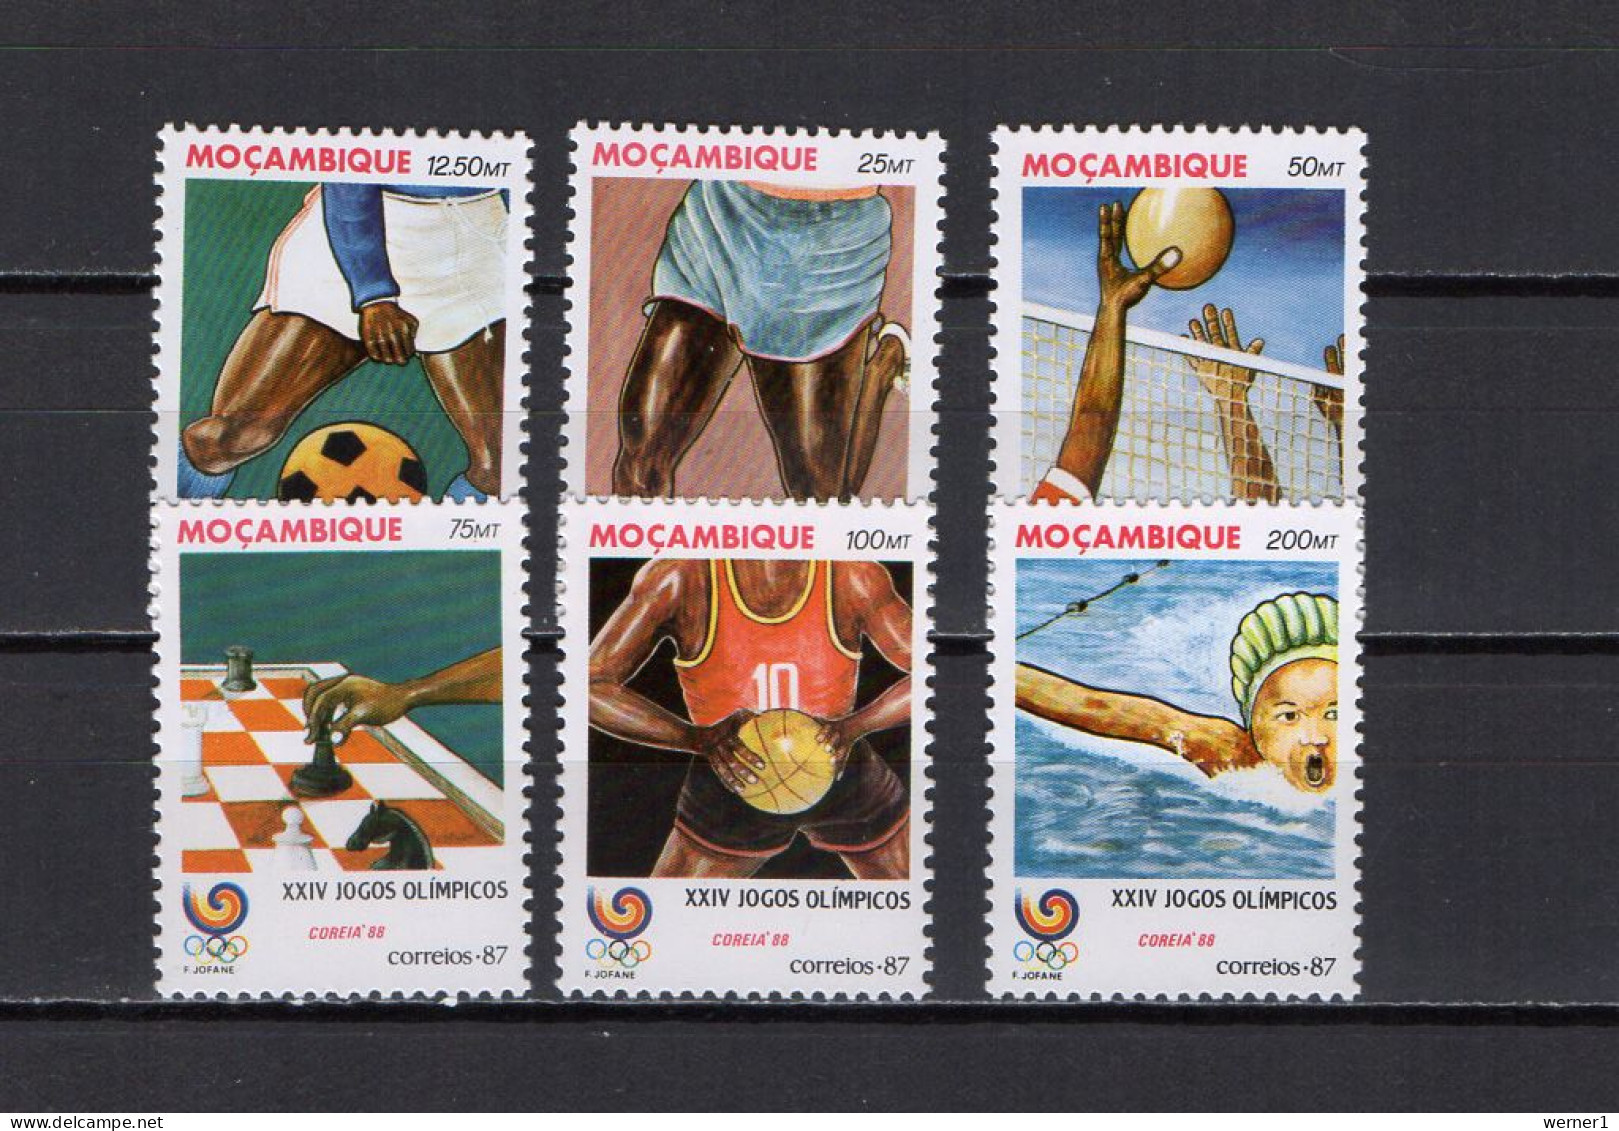 Mocambique 1987 Olympic Games Seoul, Football Soccer, Volleyball, Chess, Basketball, Swimming Set Of 6 MNH - Ete 1988: Séoul